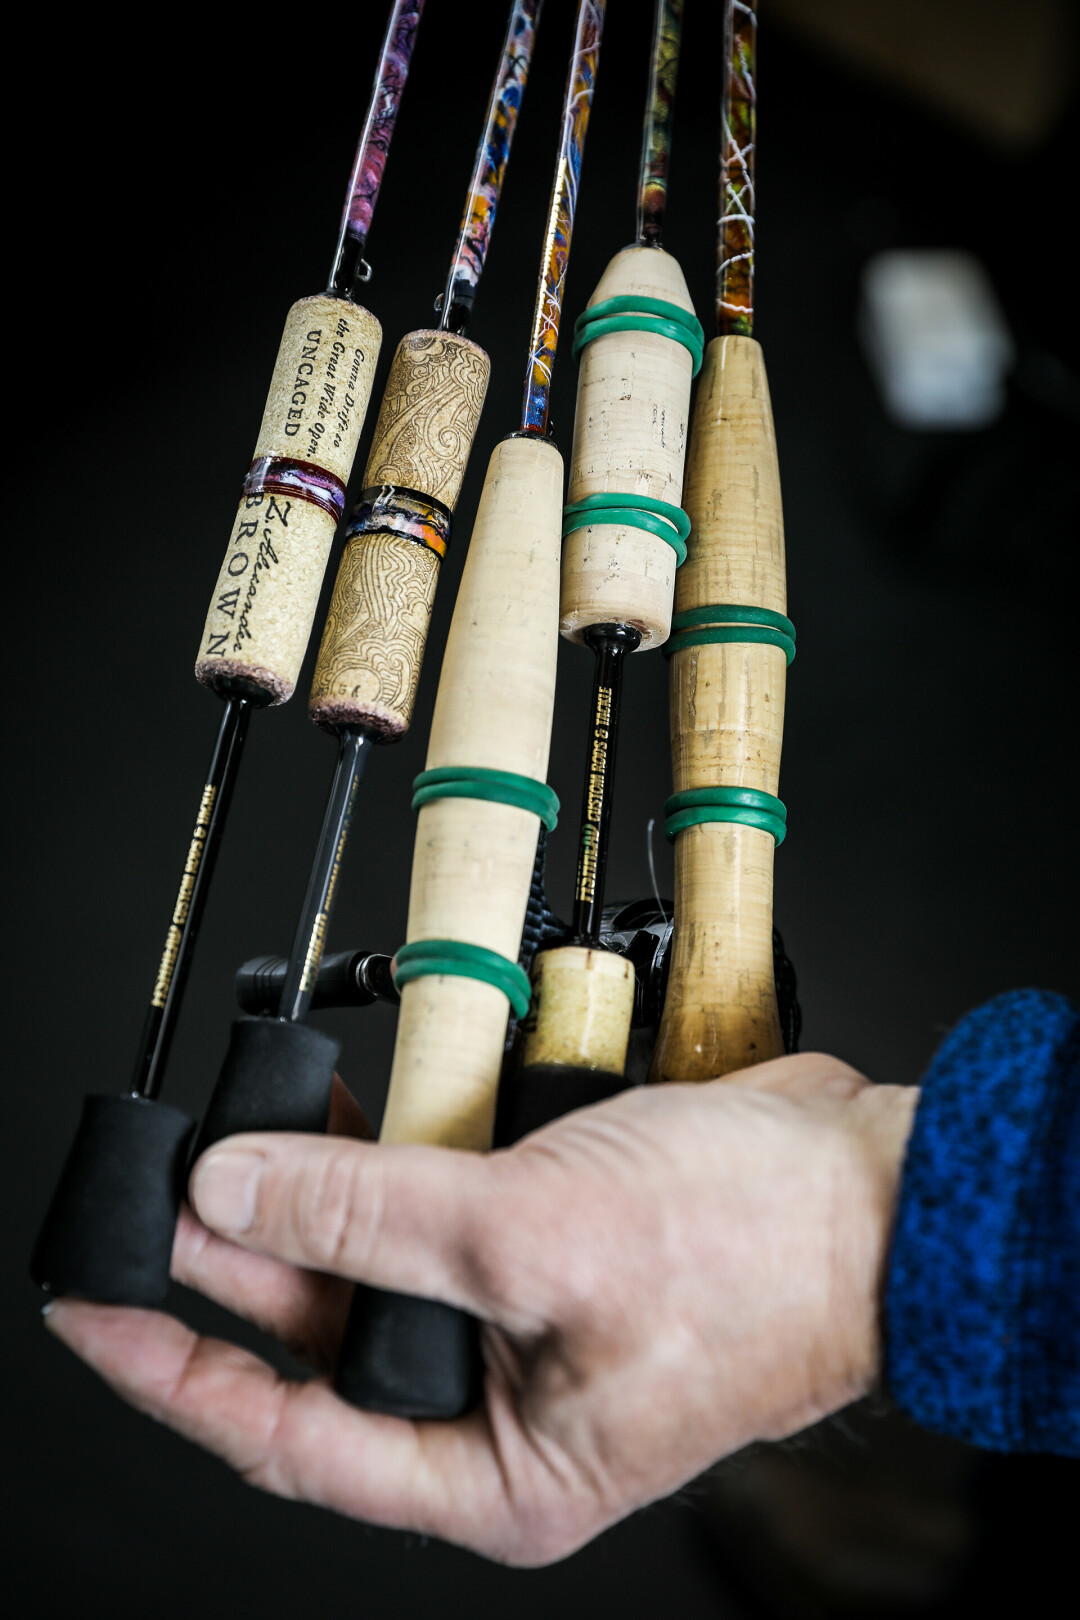 WHAT A CATCH: Fishhead Custom Rods & Tackle Crafts Specialized